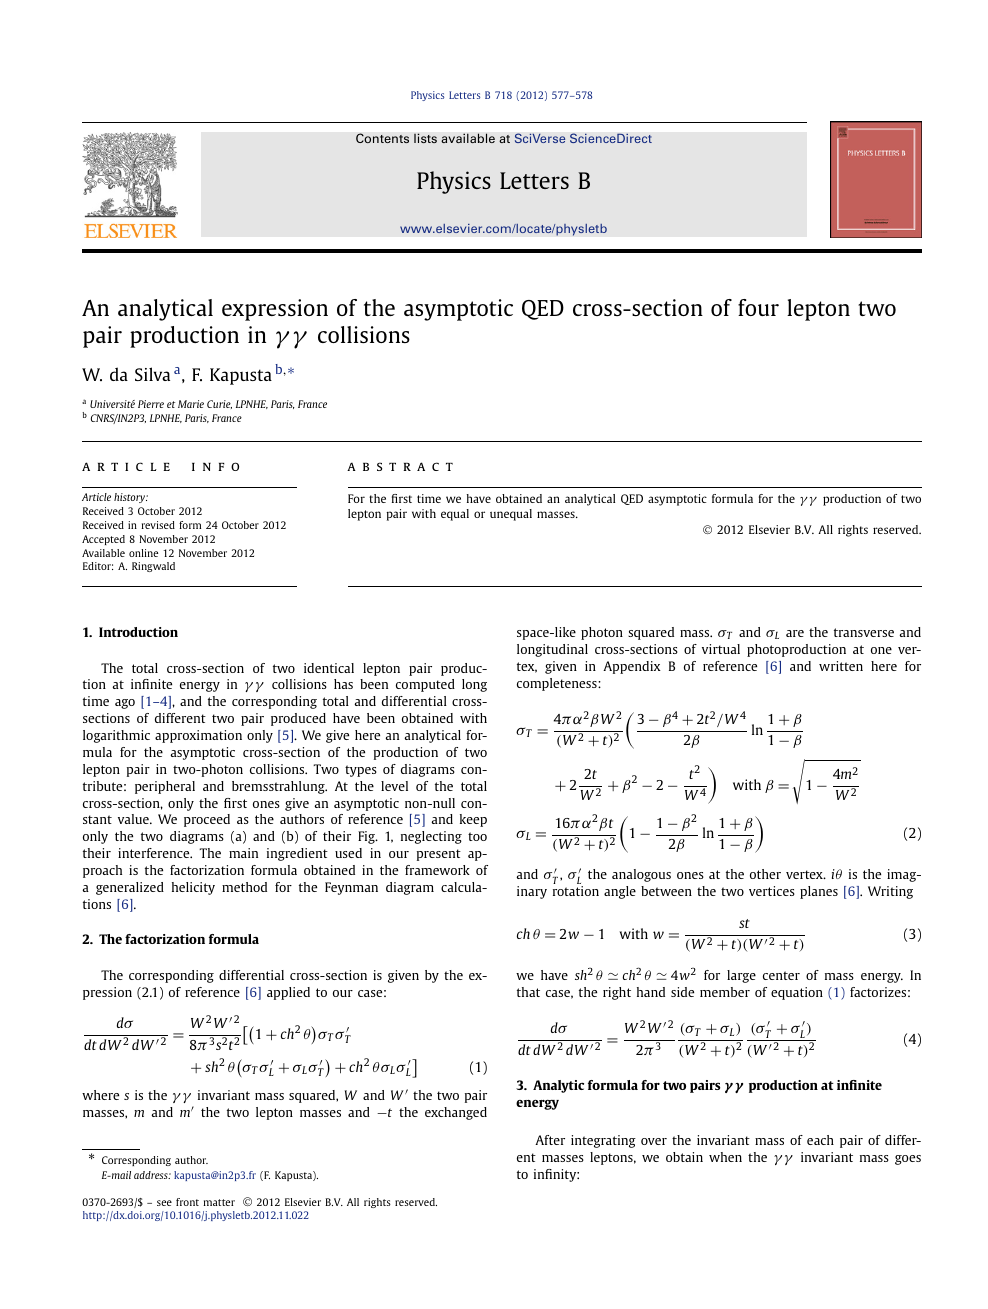 An Analytical Expression Of The Asymptotic Qed Cross Section Of Four Lepton Two Pair Production In Gg Collisions Topic Of Research Paper In Physical Sciences Download Scholarly Article Pdf And Read For